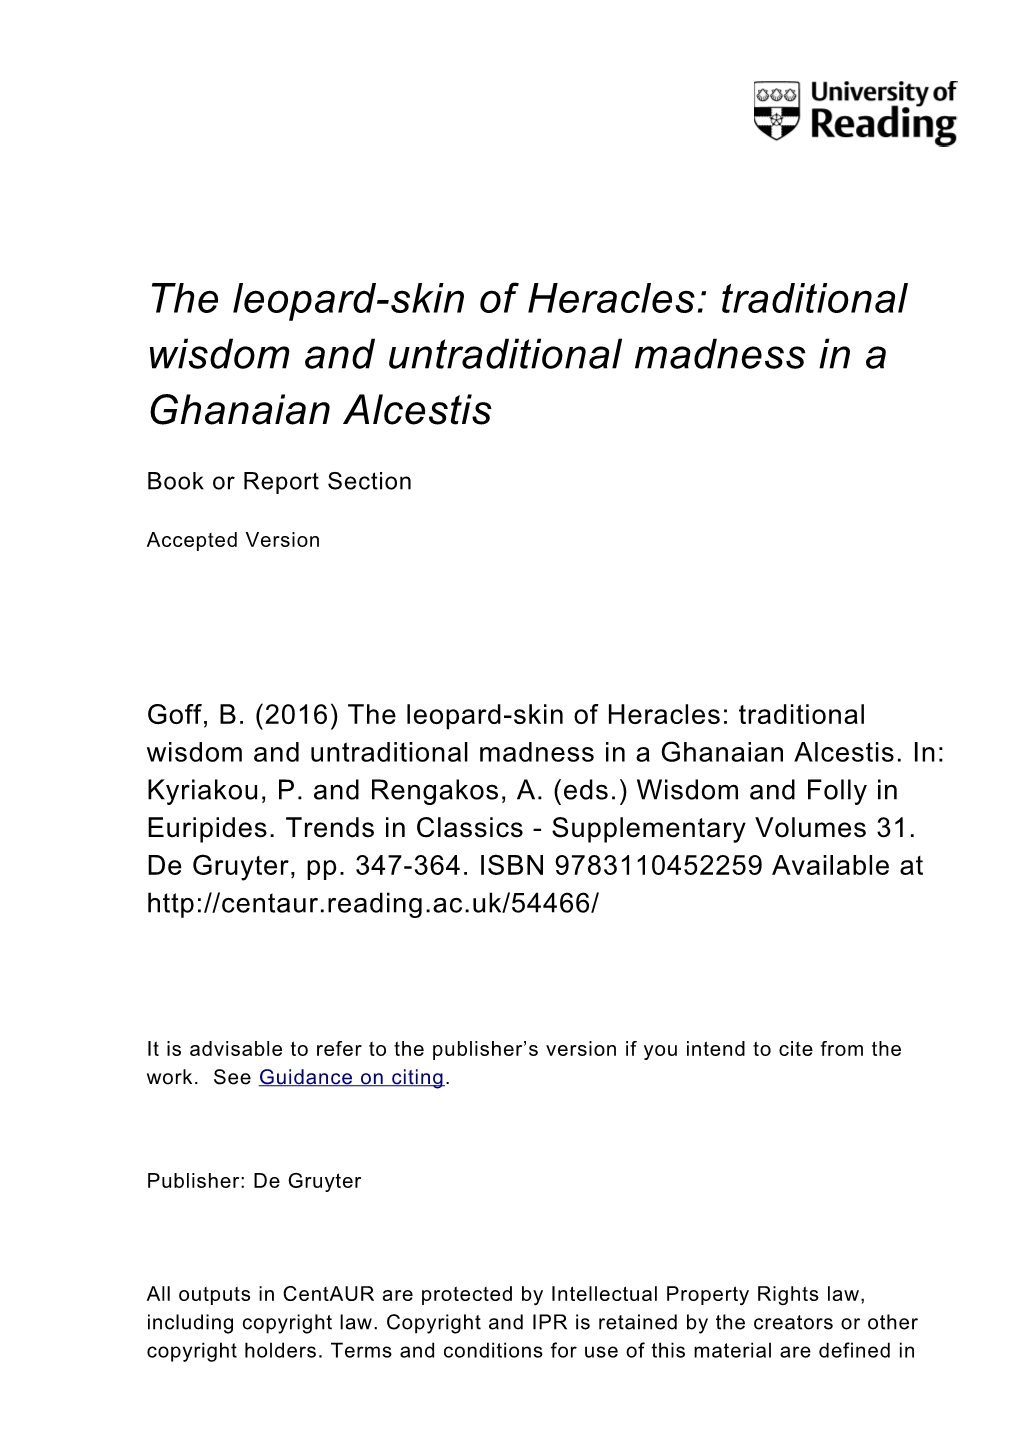 Traditional Wisdom and Untraditional Madness in a Ghanaian Alcestis